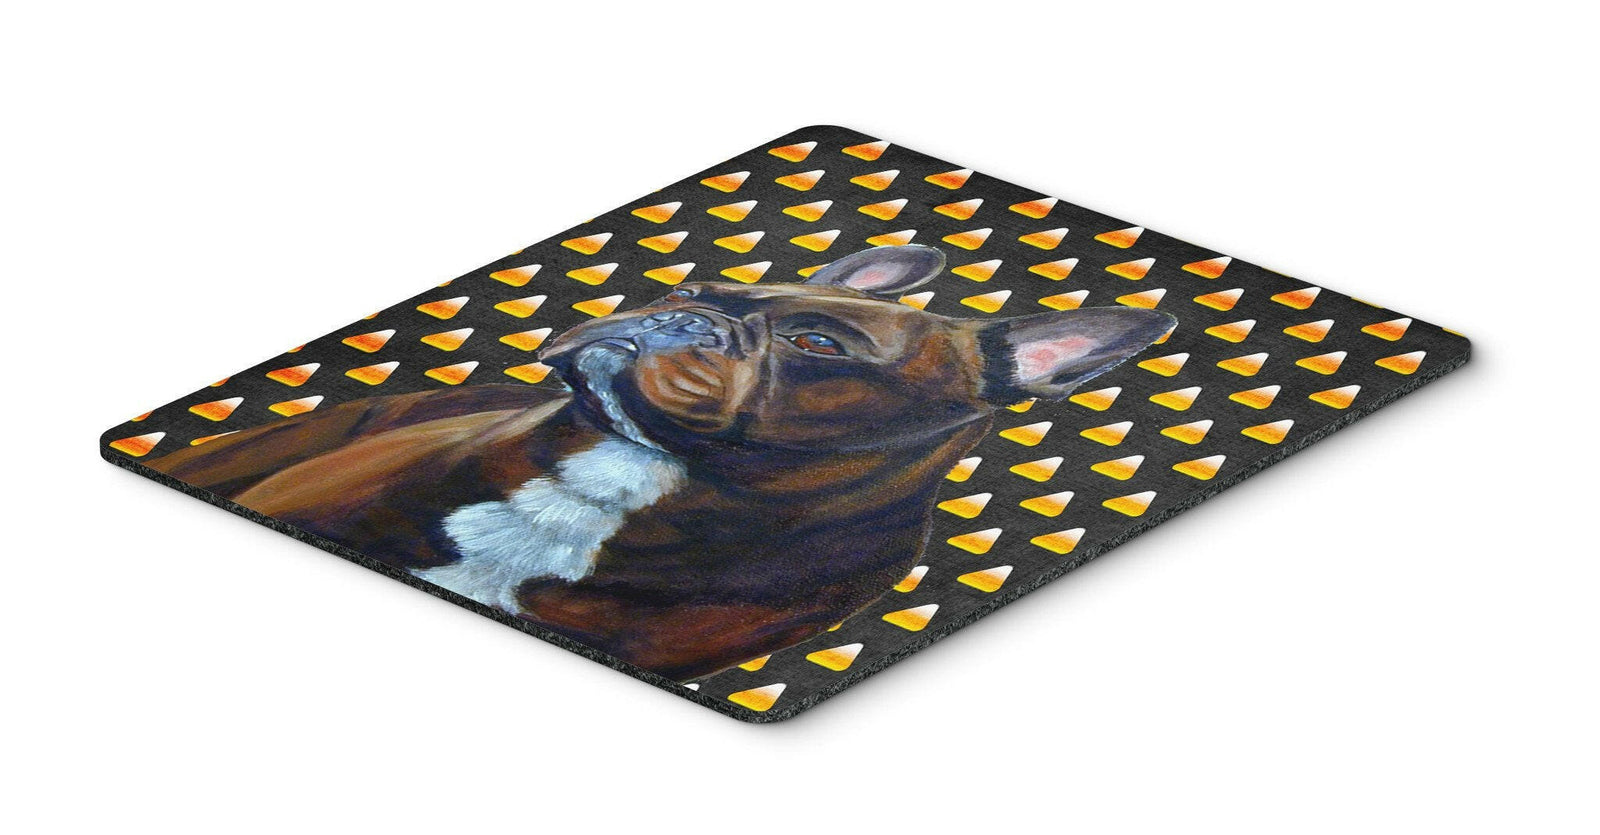 French Bulldog Candy Corn Halloween Portrait Mouse Pad, Hot Pad or Trivet by Caroline's Treasures